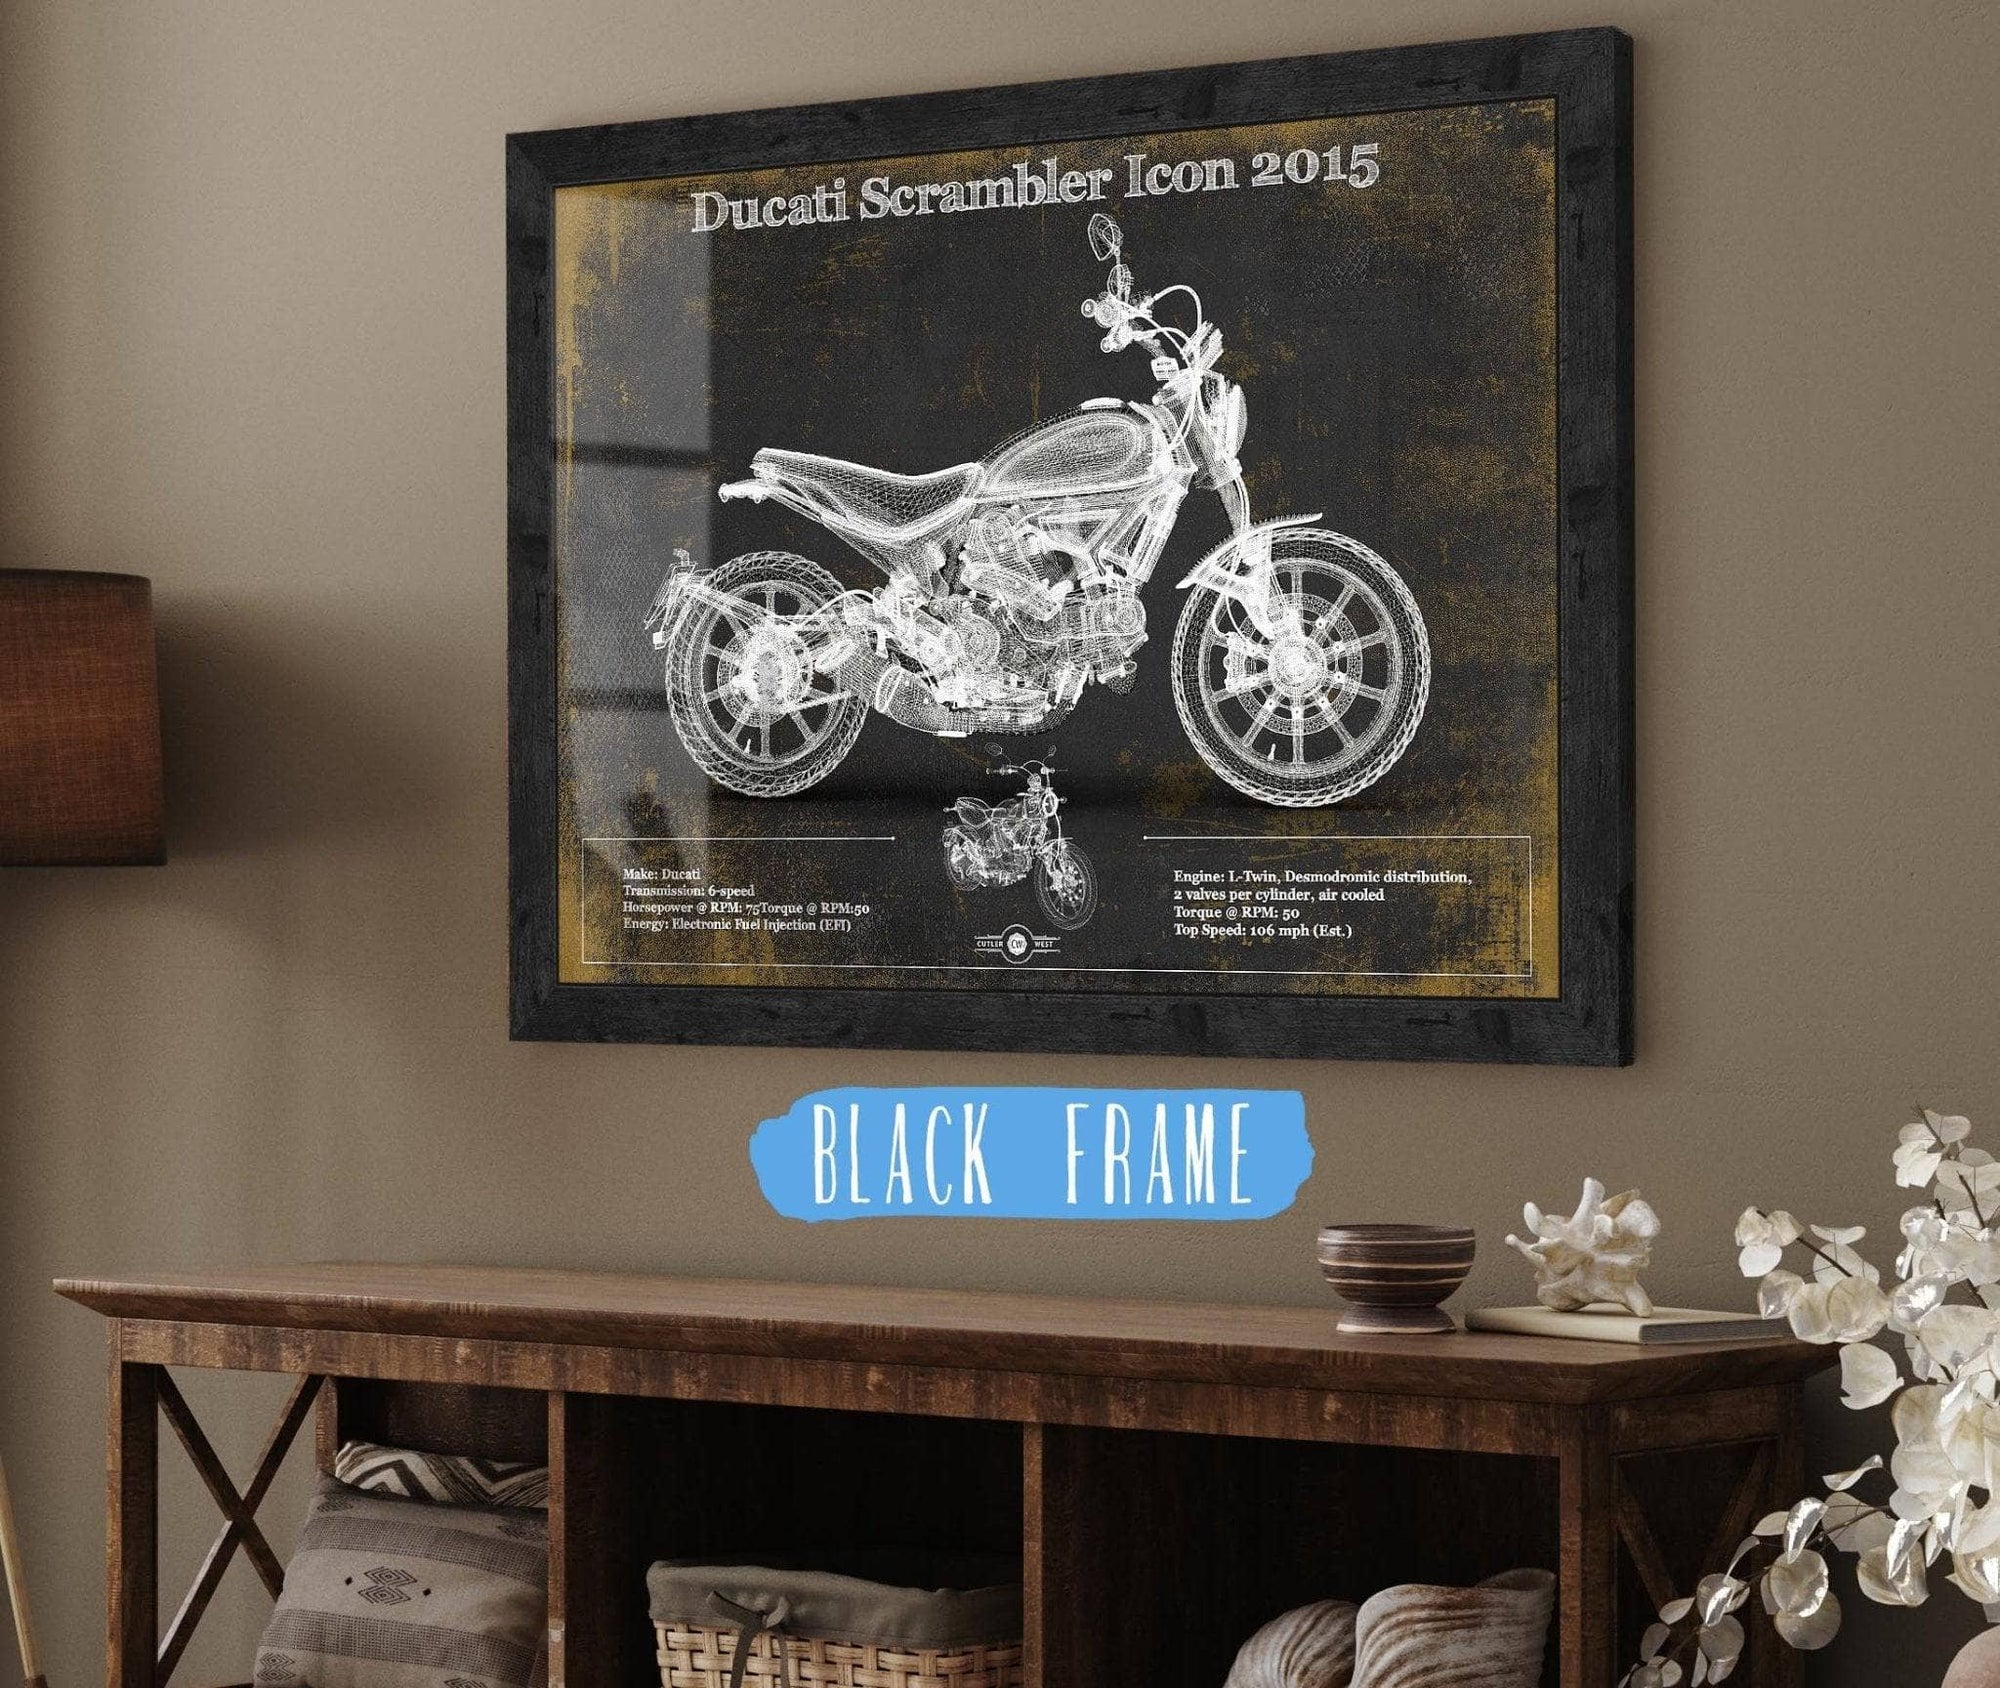 Cutler West Best Selling Collection 14" x 11" / Black Frame Ducati Scrambler Icon 2015 Vintage Blueprint Motorcycle Patent Print 845000226_61212